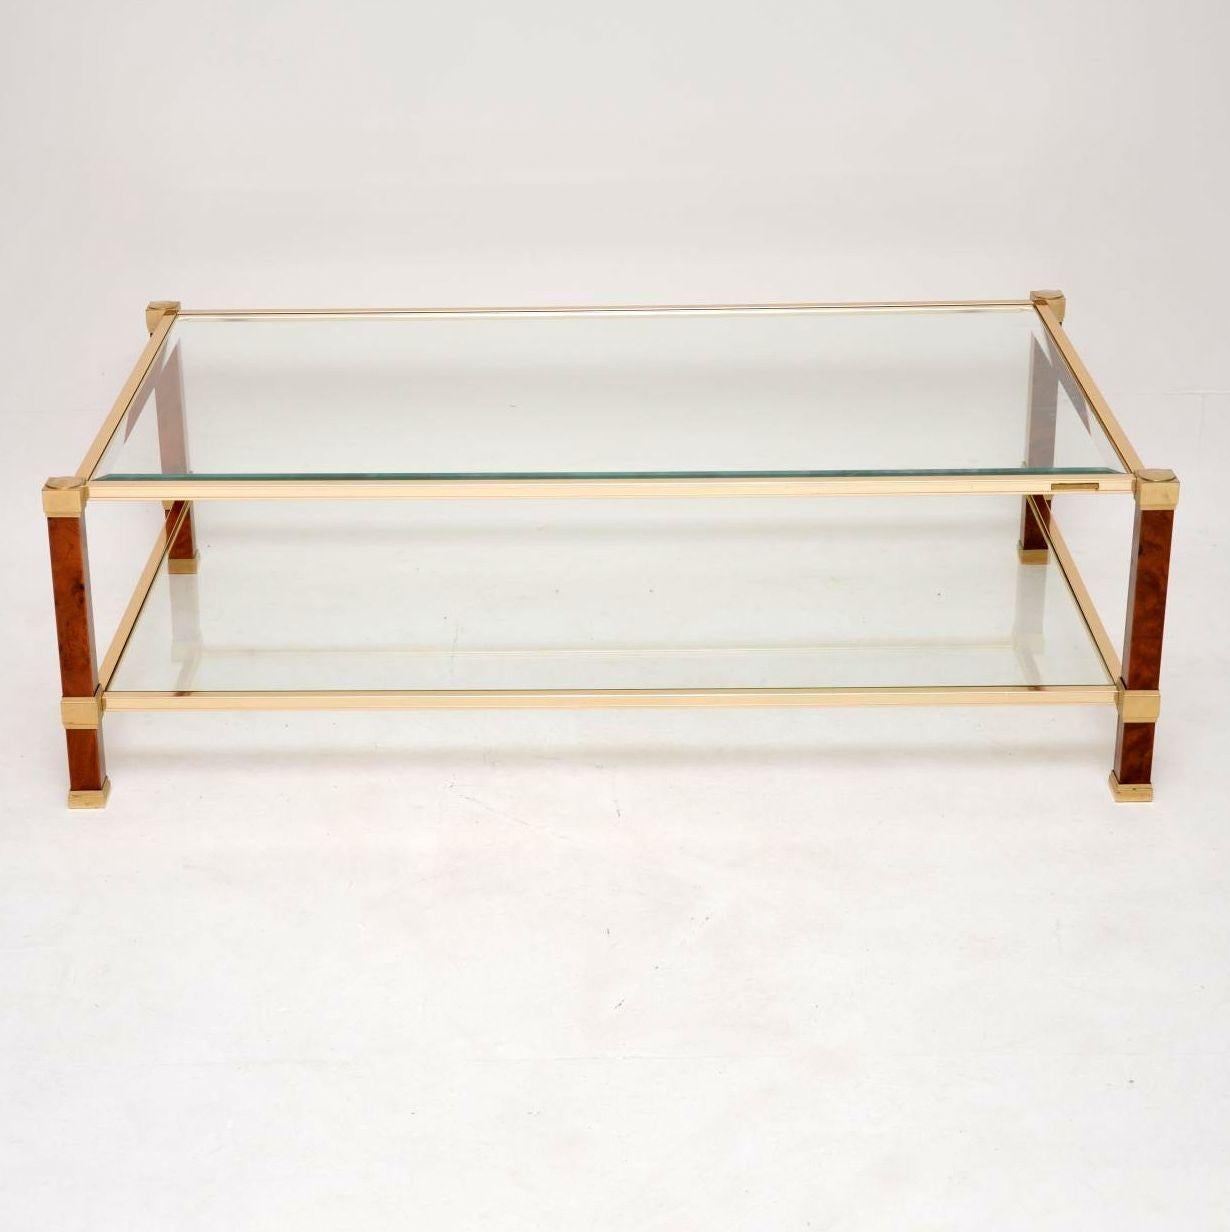 A stunning and very well made vintage coffee table, this was made in France during the 1970’s by Pierre Vandel. It is in superb condition for its age, with hardly any wear to be seen. This has a clear bevelled glass top and also a lower tier for